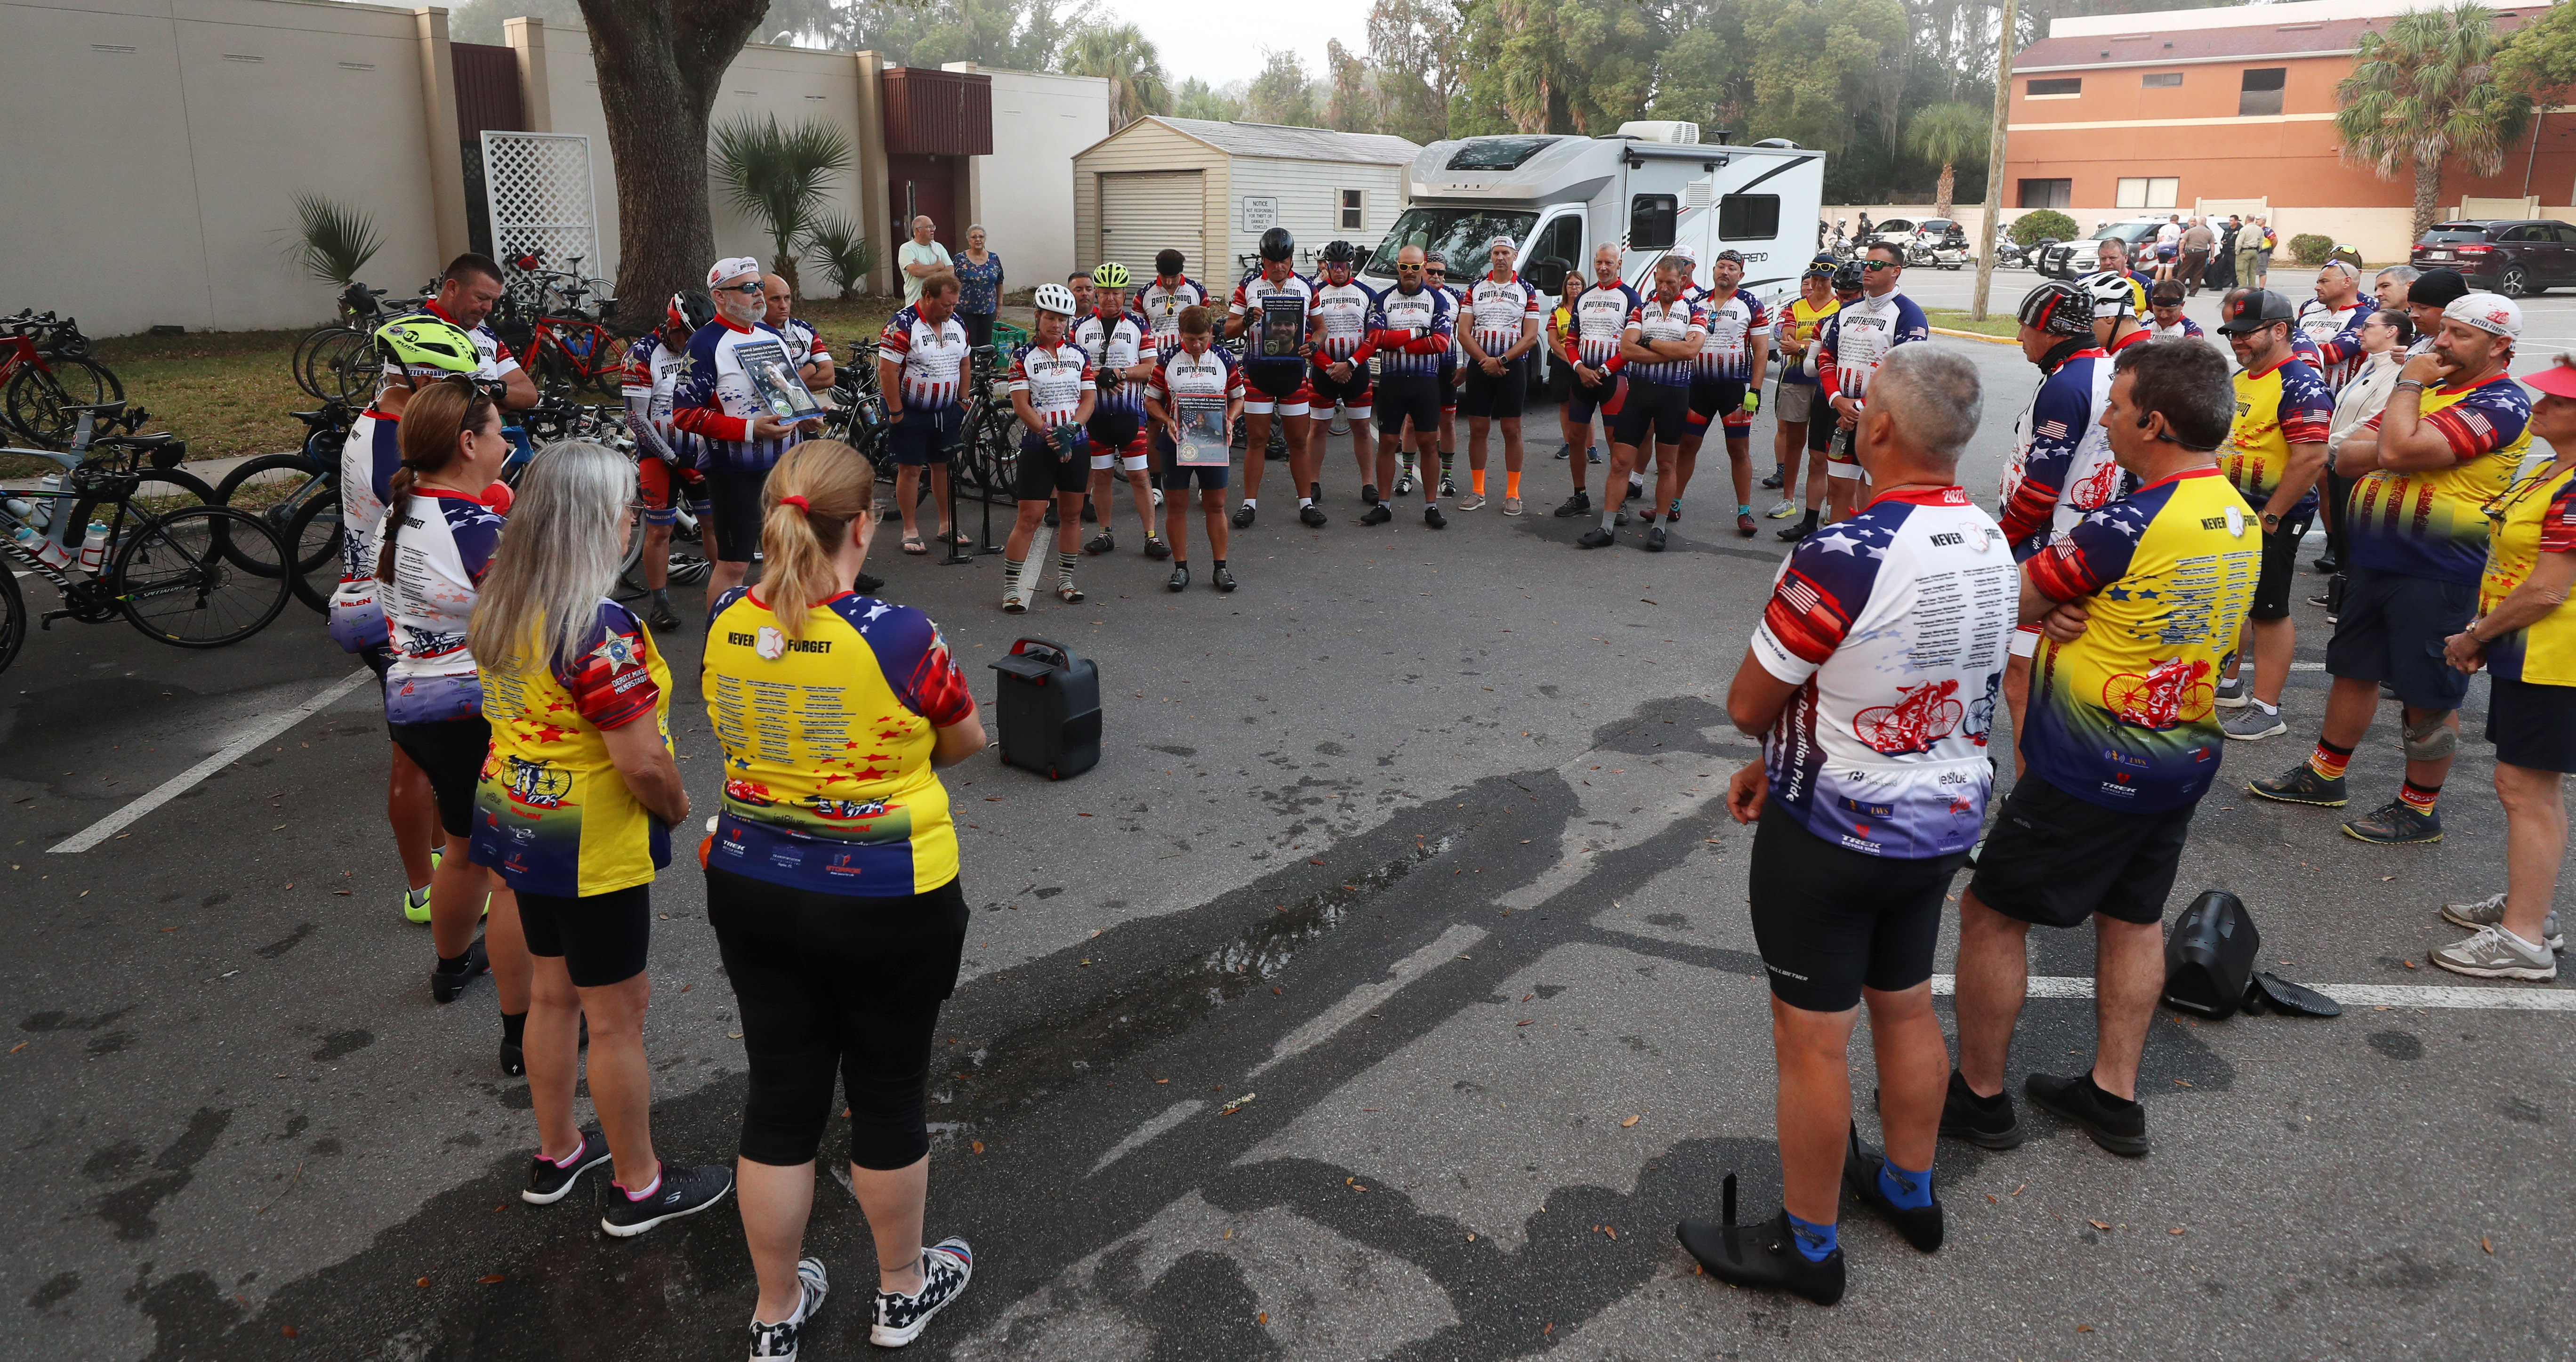 Cyclist participating in the Brotherhood Ride gather before departing the Elks Lodge 1079, on their way to Cocoa Beach, on Tuesday, October 31, 2023. The ride is dedicated to the 28 Florida Fallen First Responders who died in the line of duty in 2022 while protecting their communities. They started in Naples and will end their 9-day ride through Florida in Miami.(Ricardo Ramirez Buxeda/ Orlando Sentinel)